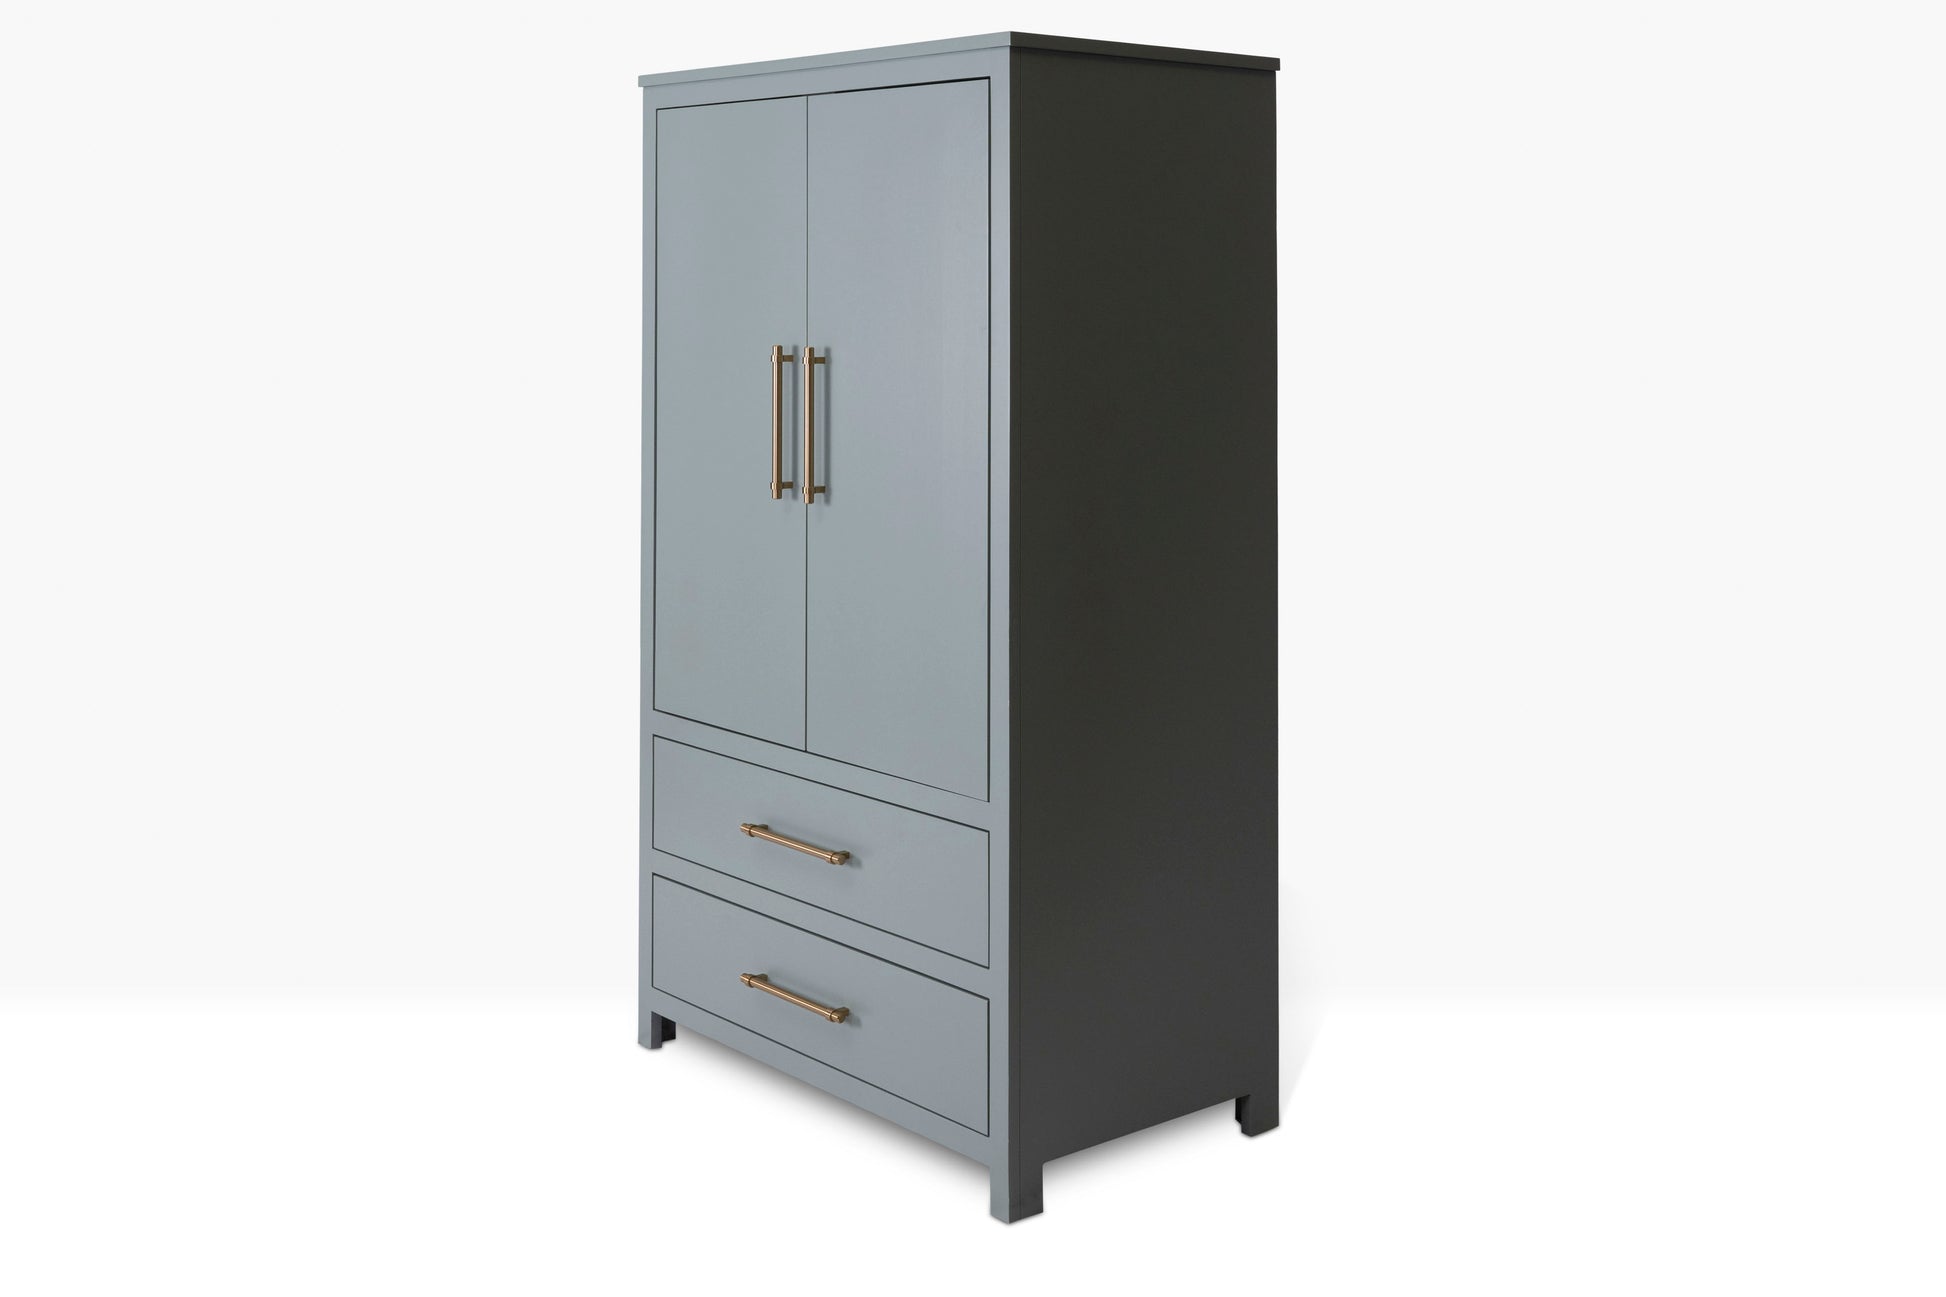 Acadia Tremont Armoire with Two Drawers shown from the side to show details. Pictured in Carolina Gull finish.